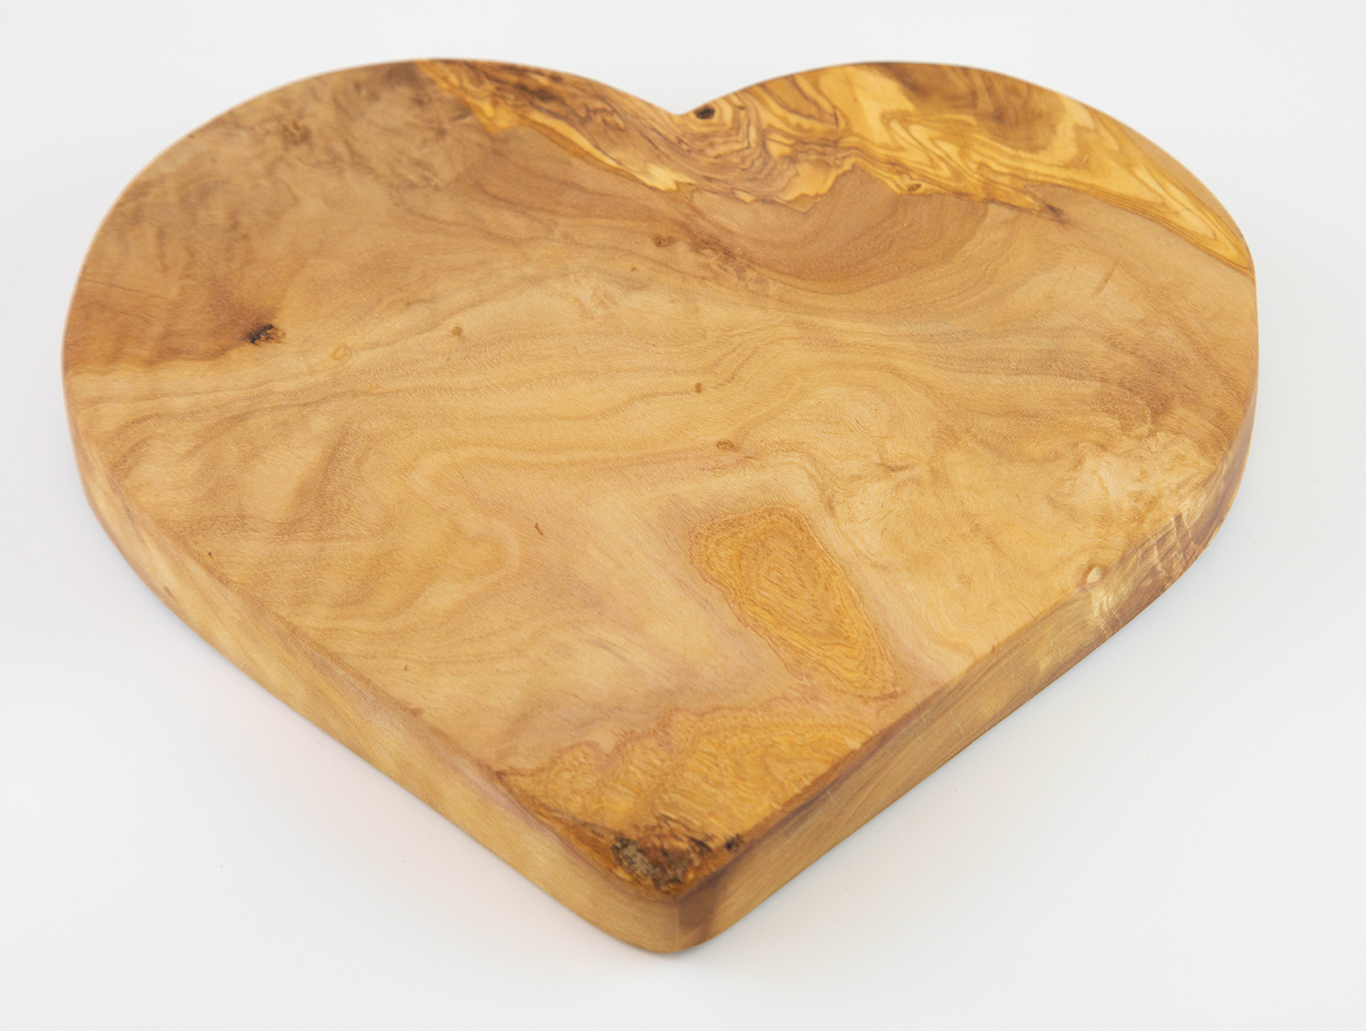 Cutting board made of olive wood in heart shape 20 x 17 cm.